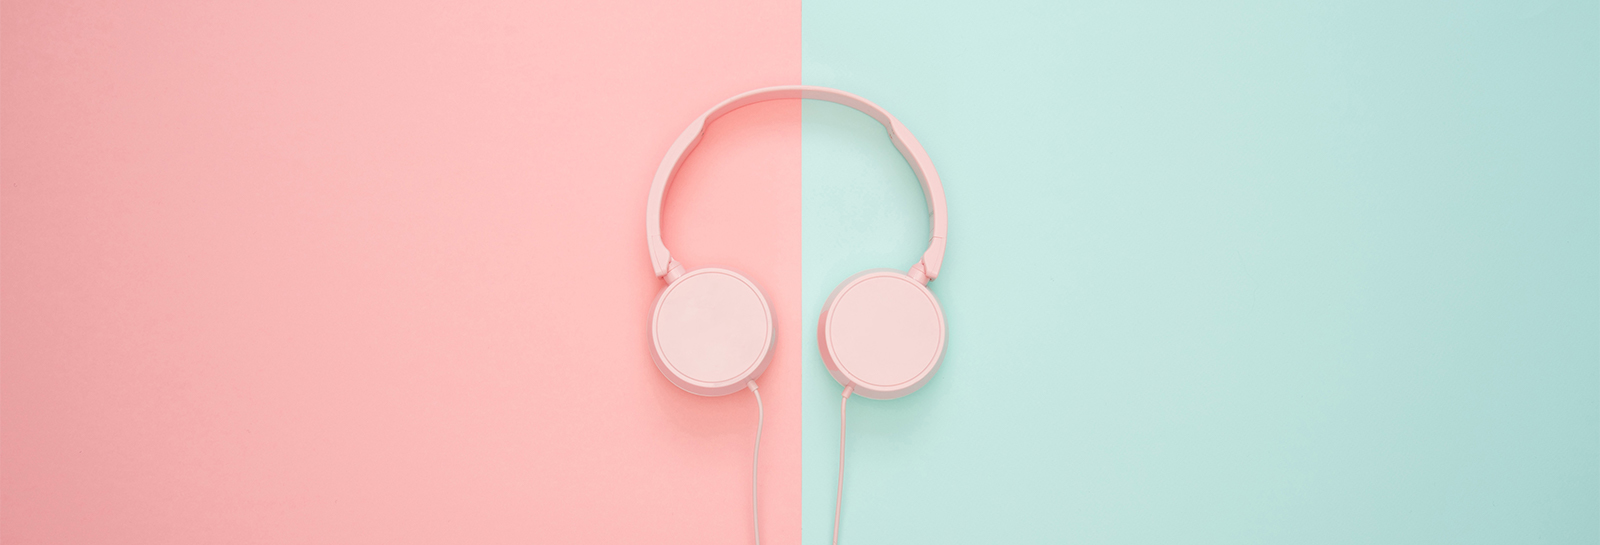 headphones on a dual colored background